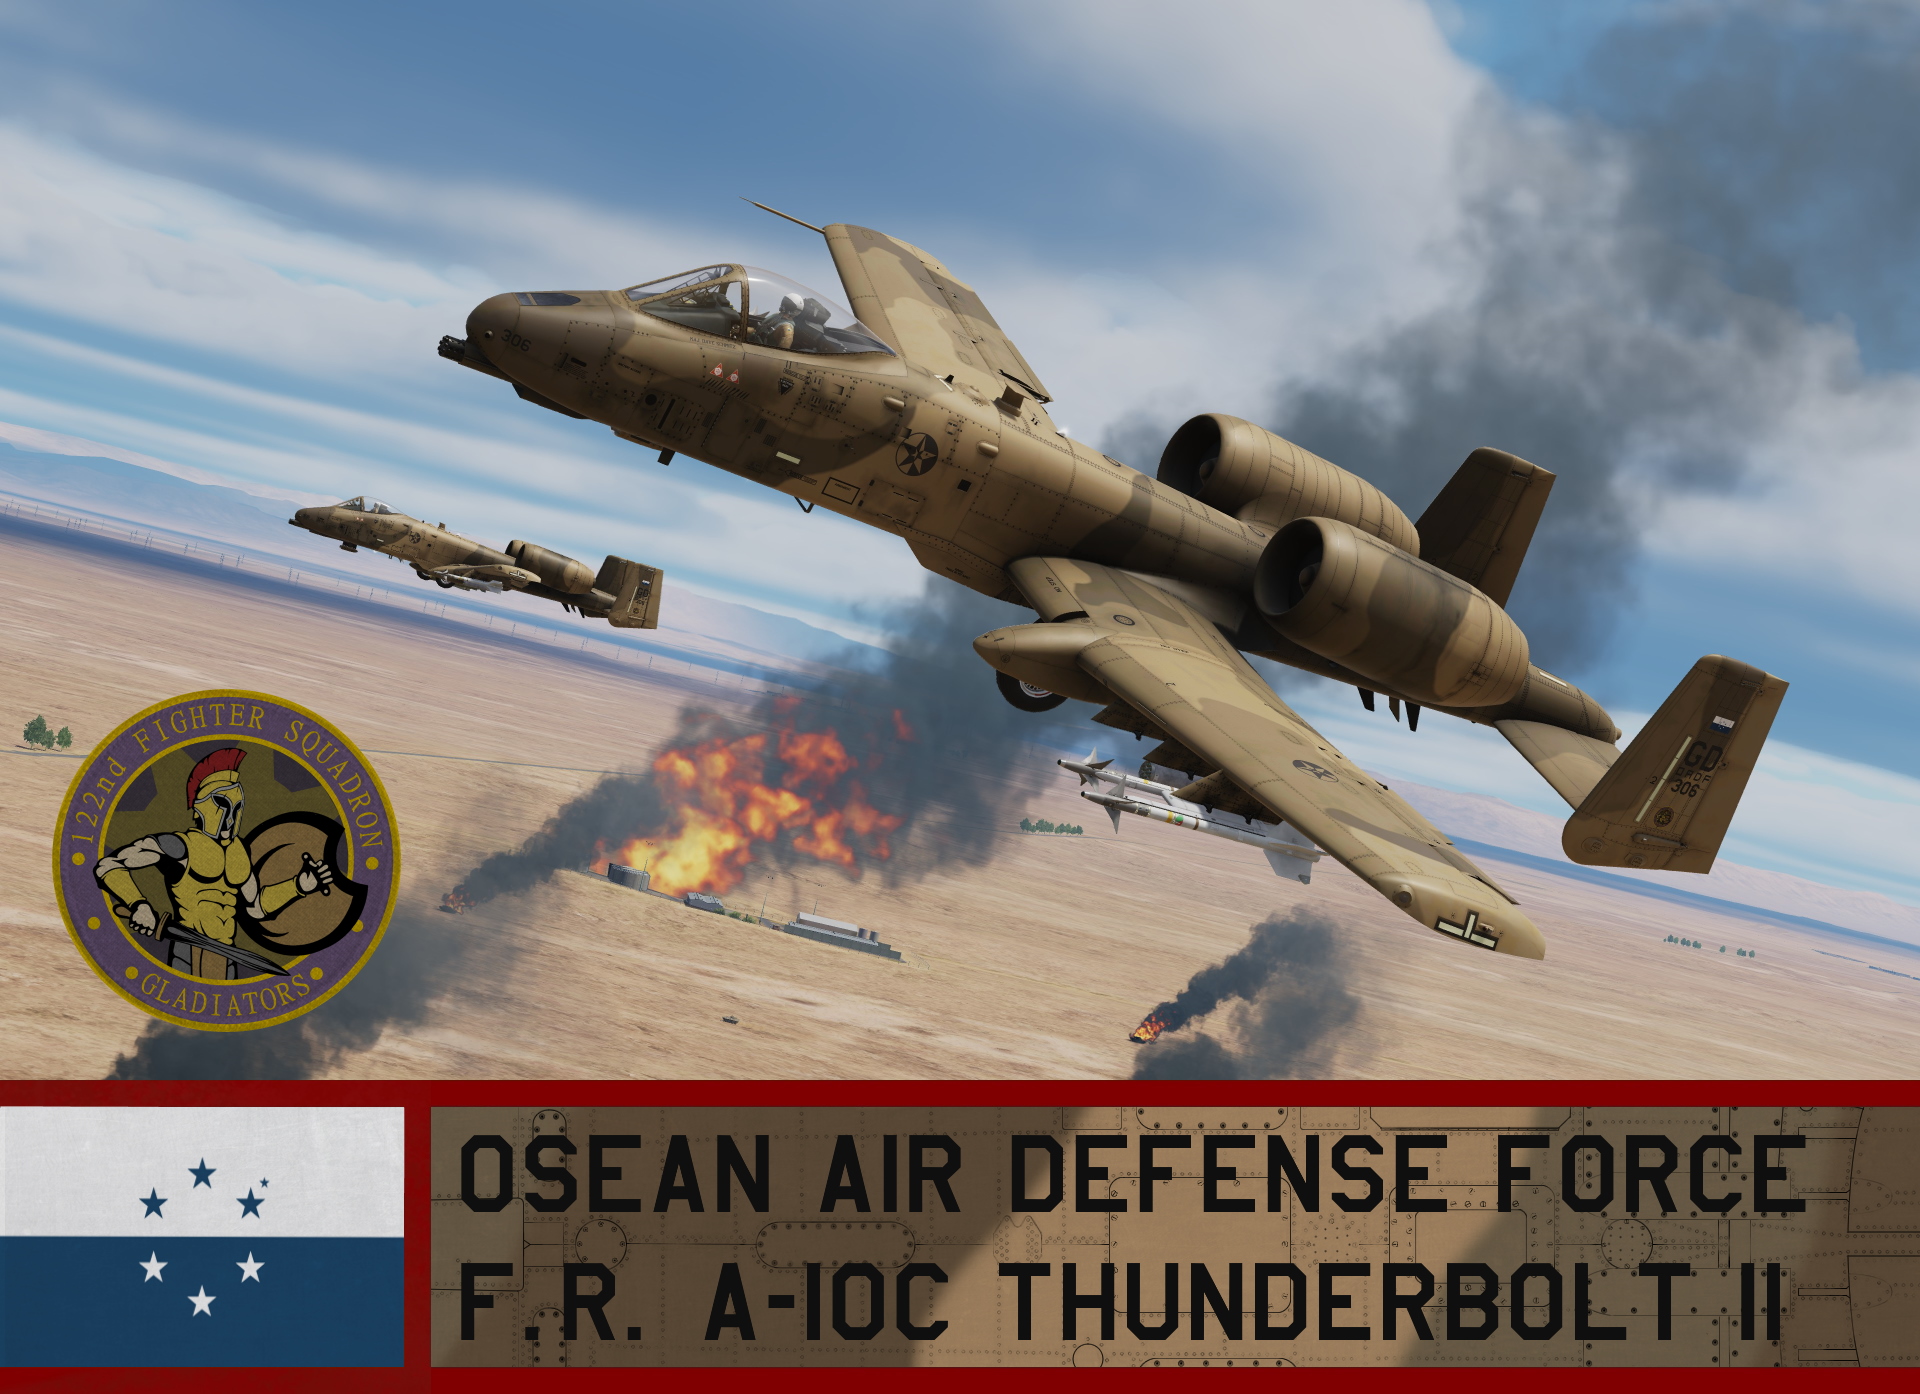 Osean Air Defense Force A-10C - Ace Combat 7 (122nd TFS)